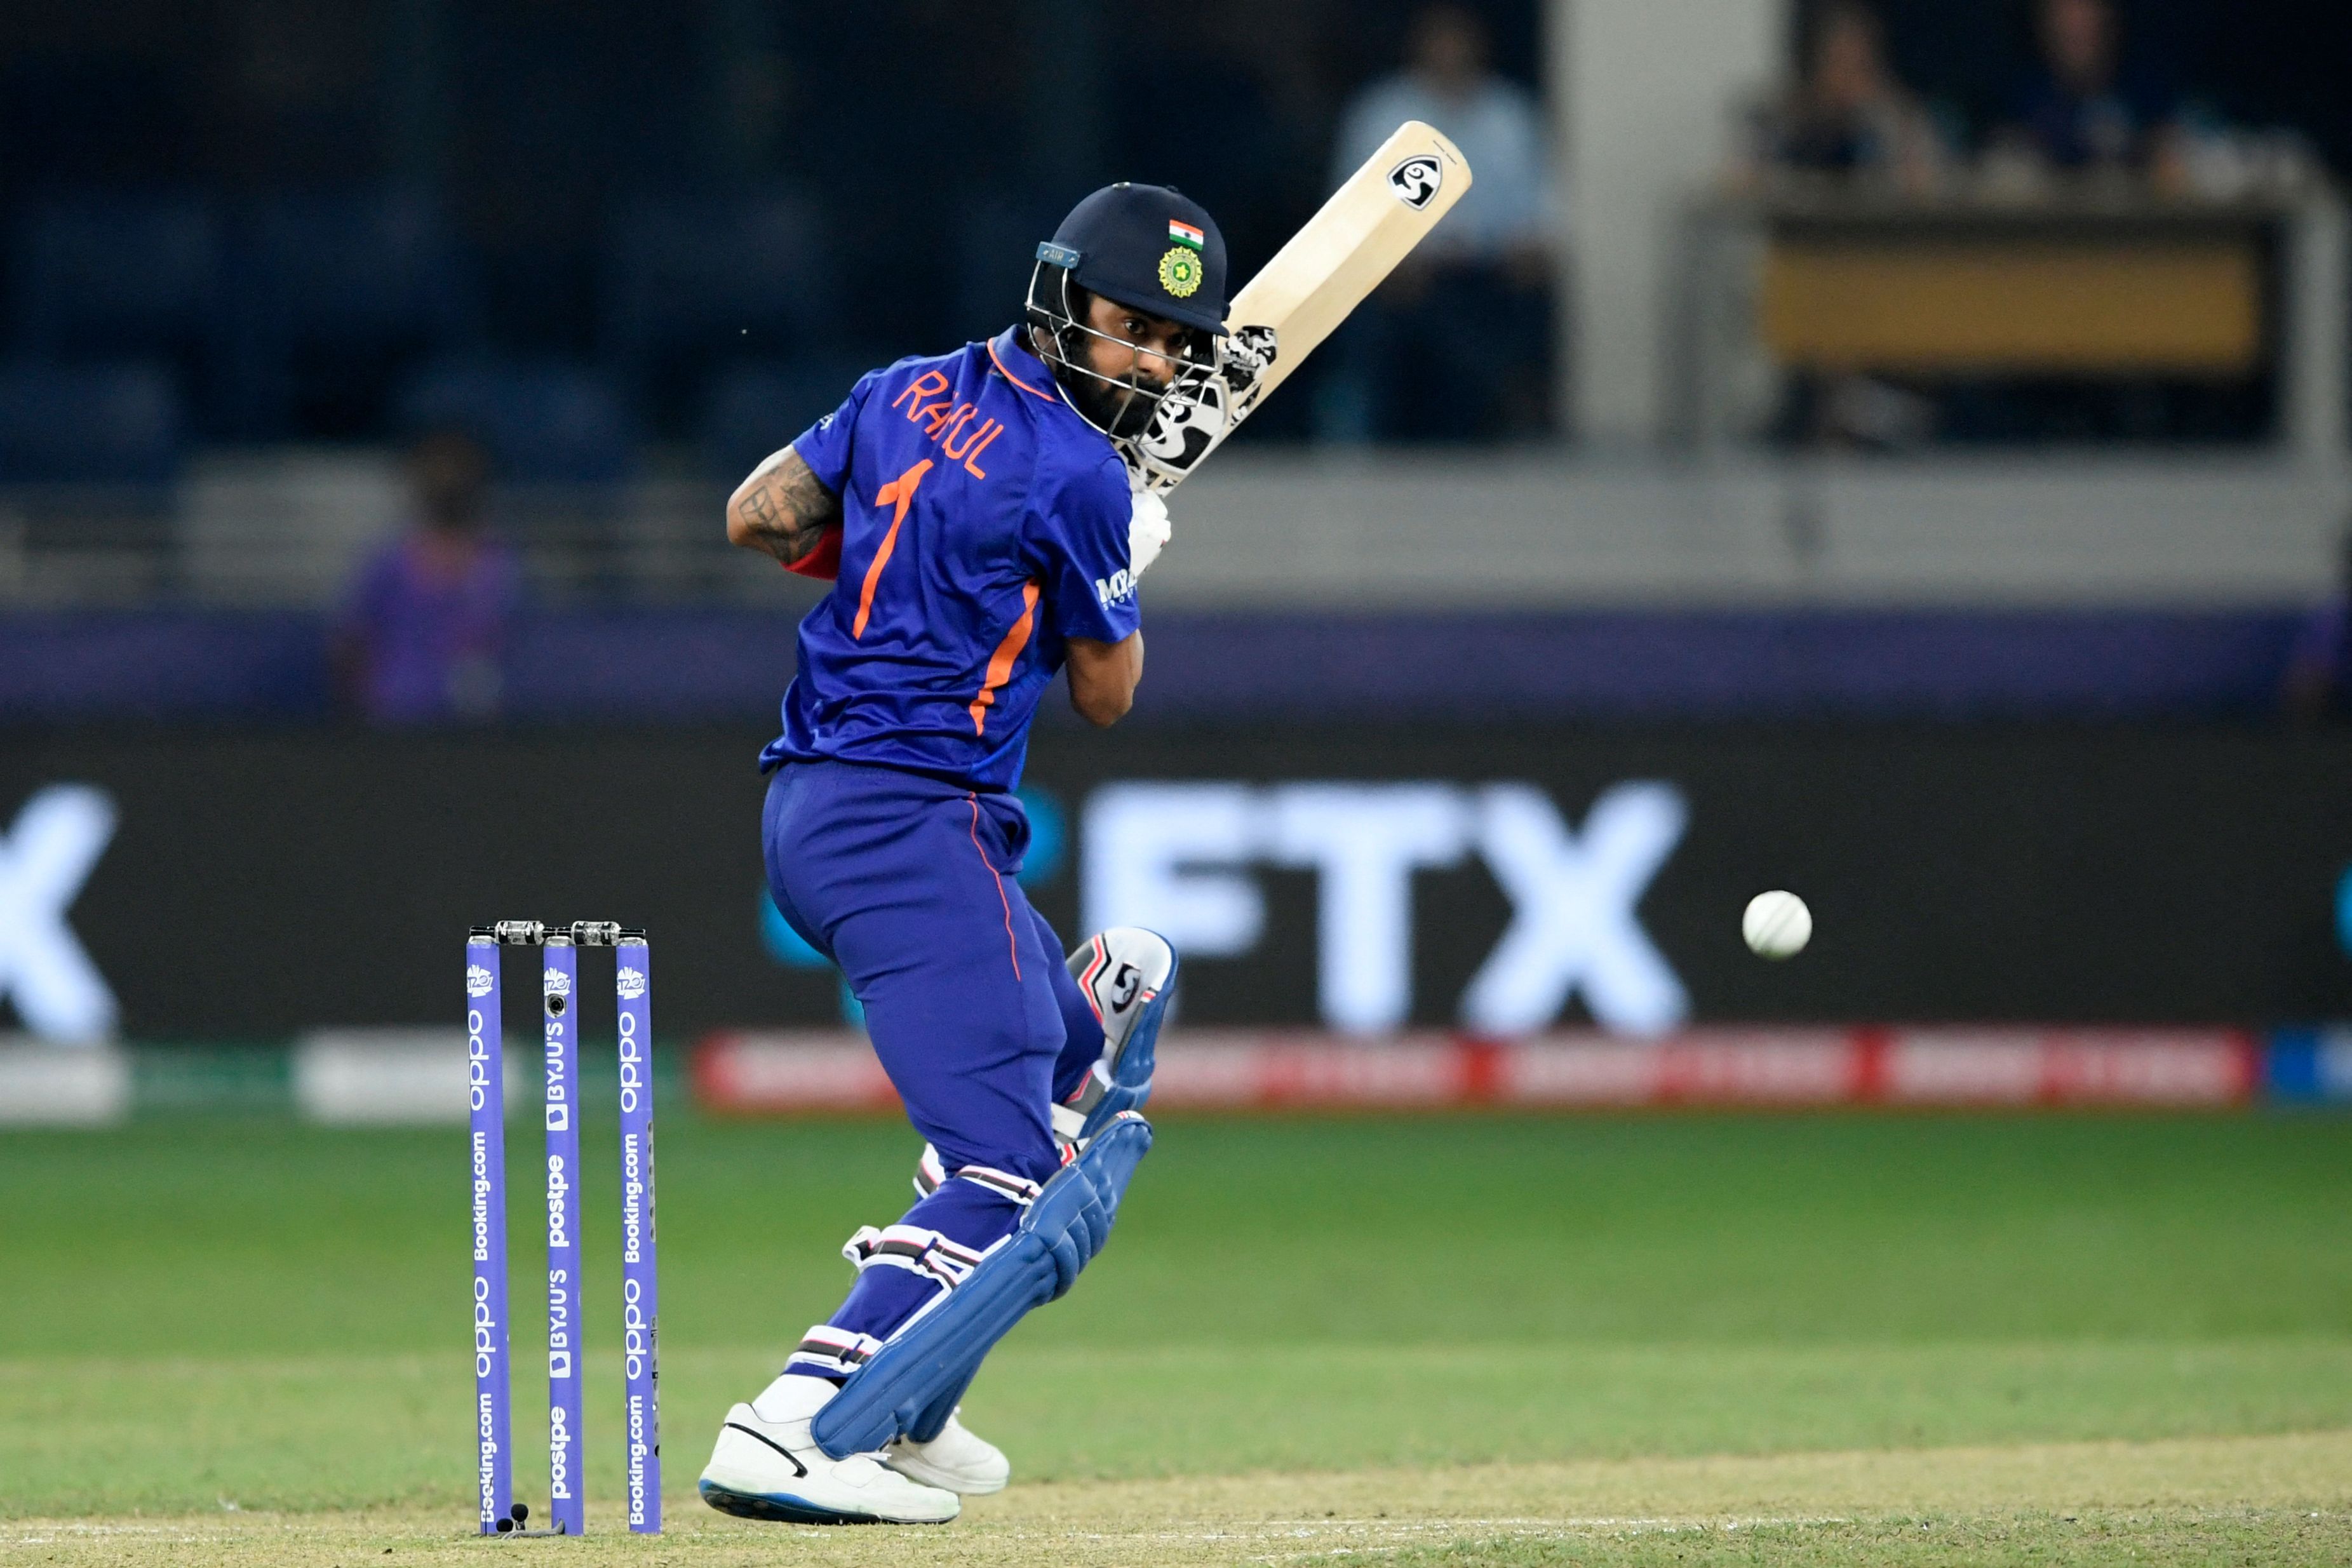 T20 World Cup 2021 | Watching India winning the 2011 World Cup changed things for me, says KL Rahul 